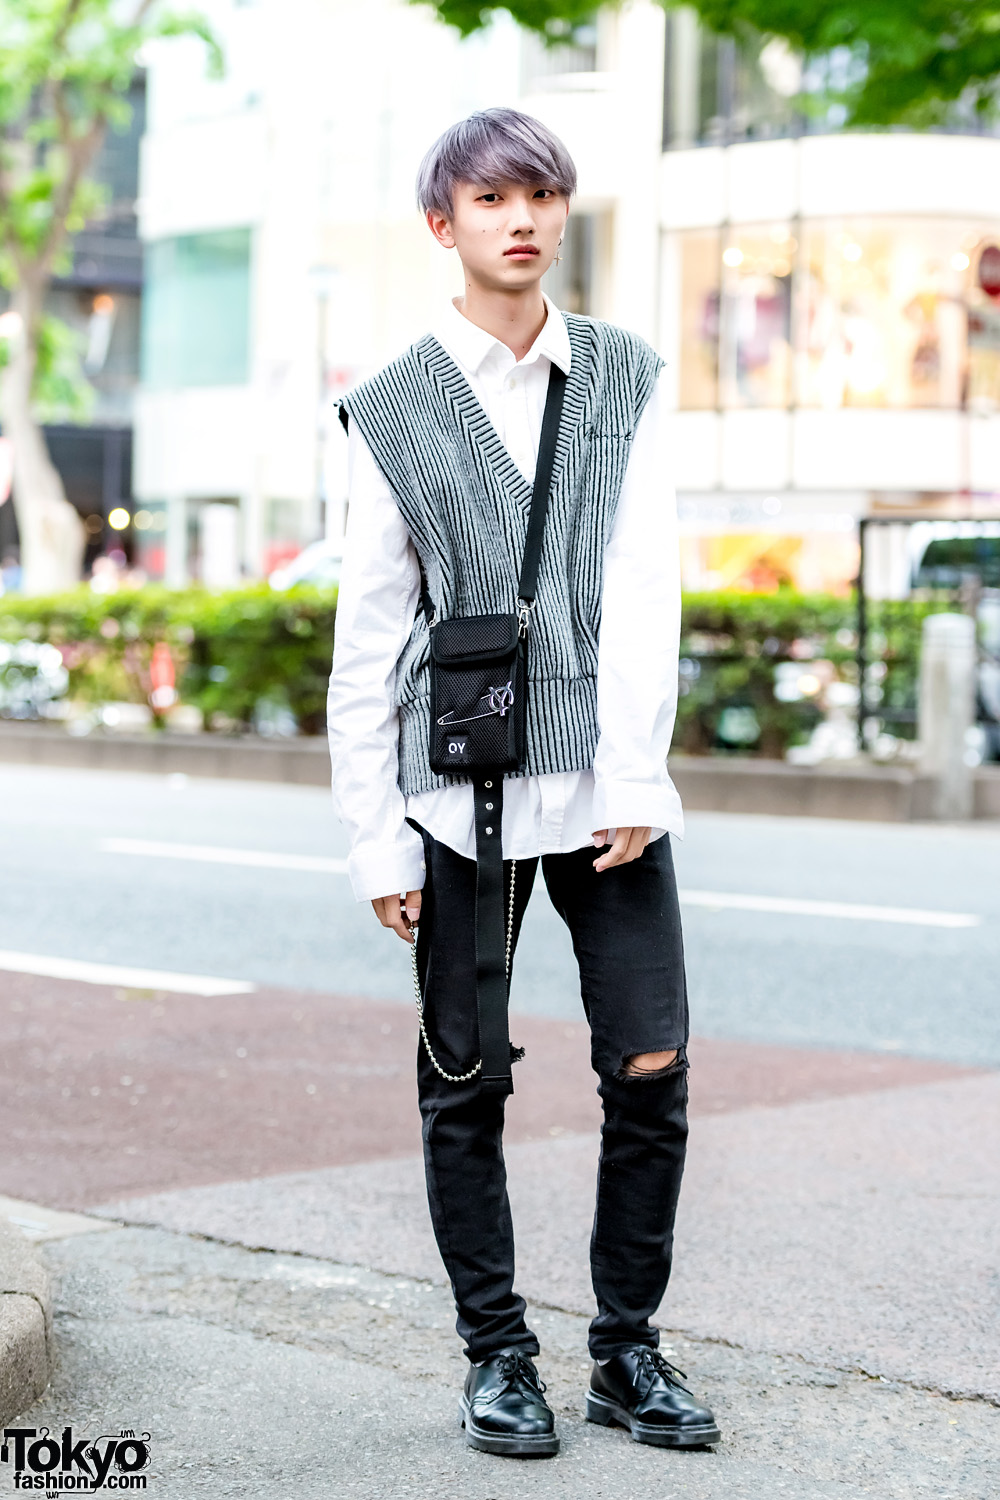 Harajuku Guy w/ Purple Hair, More Than Dope Striped Vest, Givenchy Top, Ripped Jeans, Dr. Martens Shoes & OY Bag